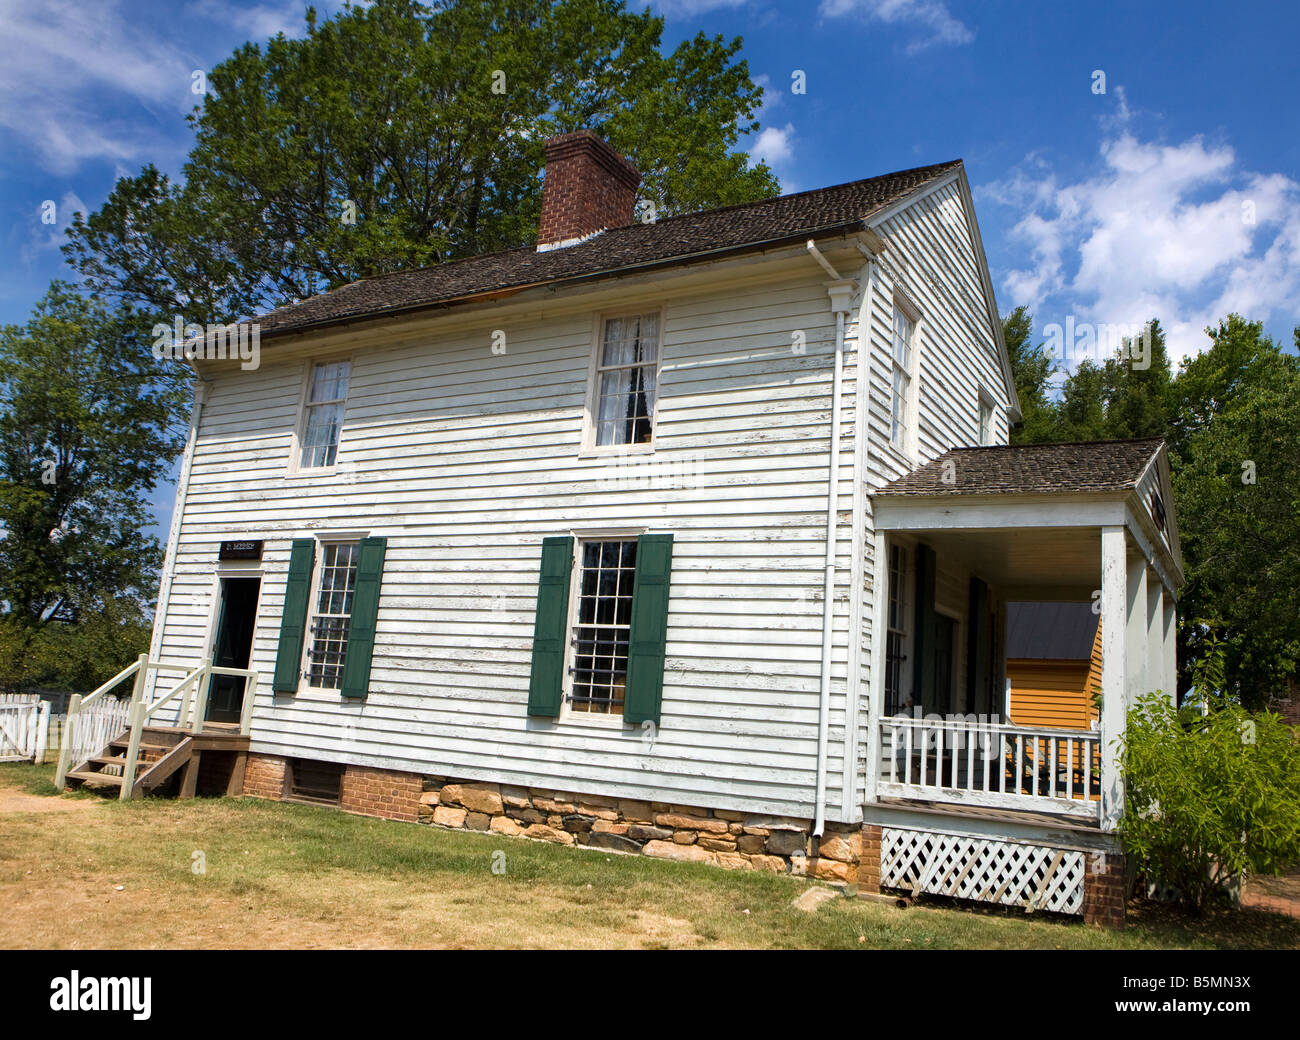 Plunkett-Meeks Store, across from the courthouse, Appomattox Court House National Historical Park, Appomattox, Virginia. Stock Photo